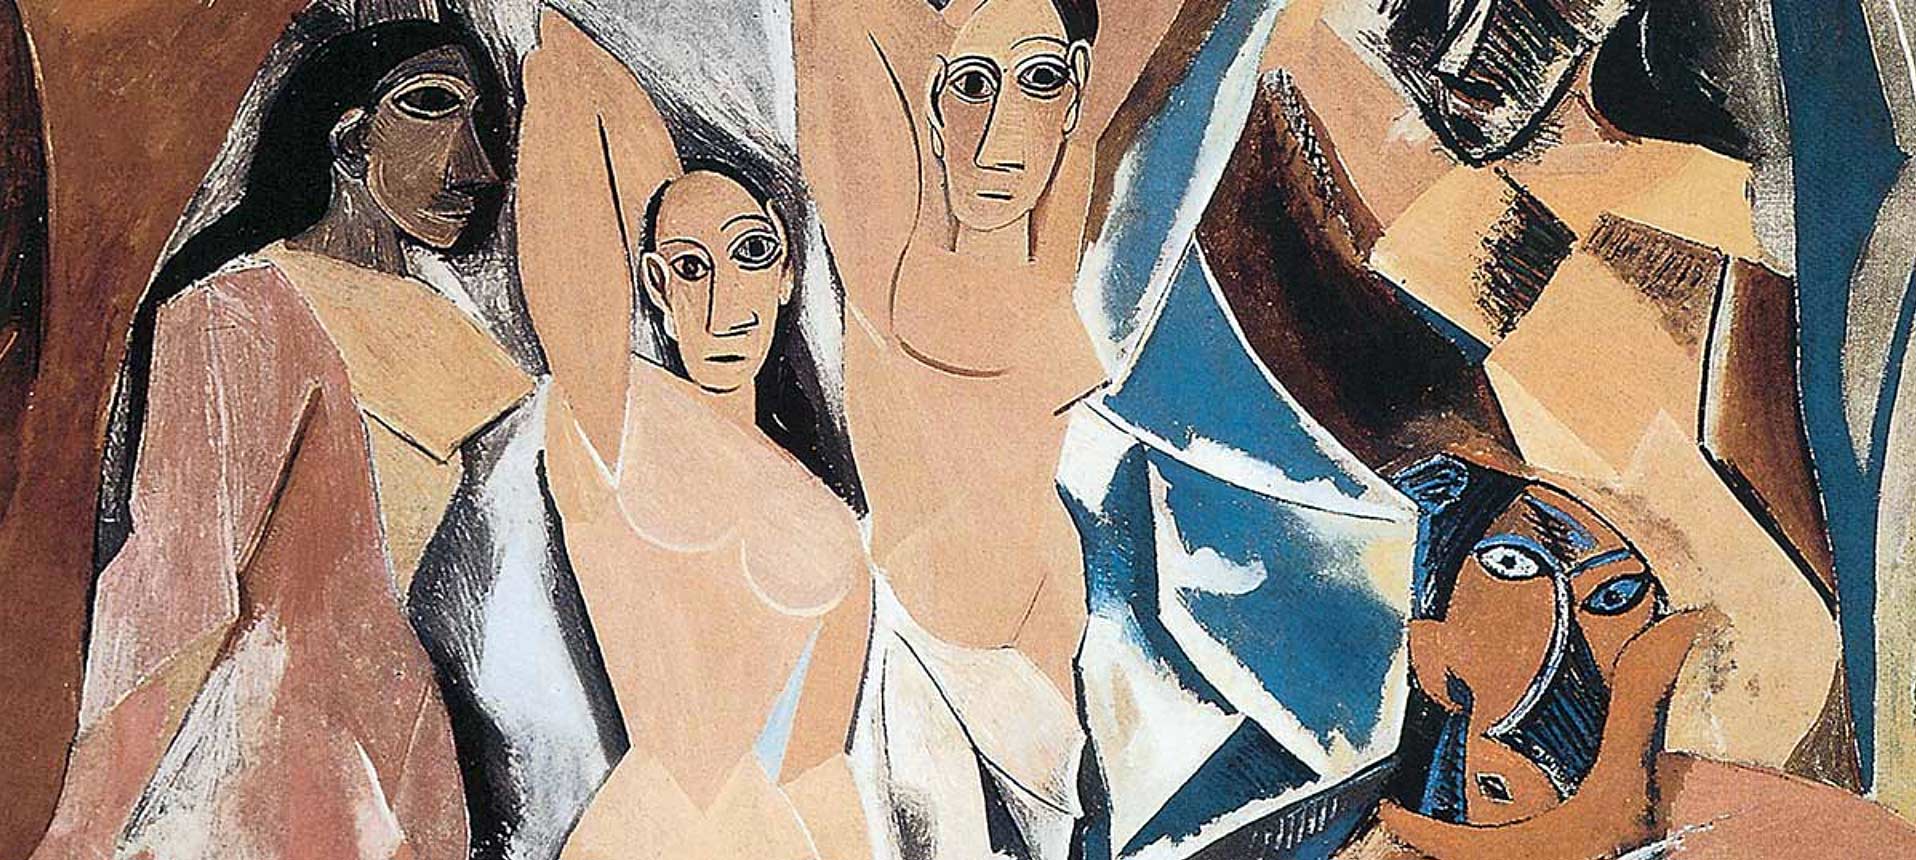 At top: "Les Demoiselles d'Avignon (The Young Ladies of Avignon)" (1907) is at the Museum of Modern Art in New York.